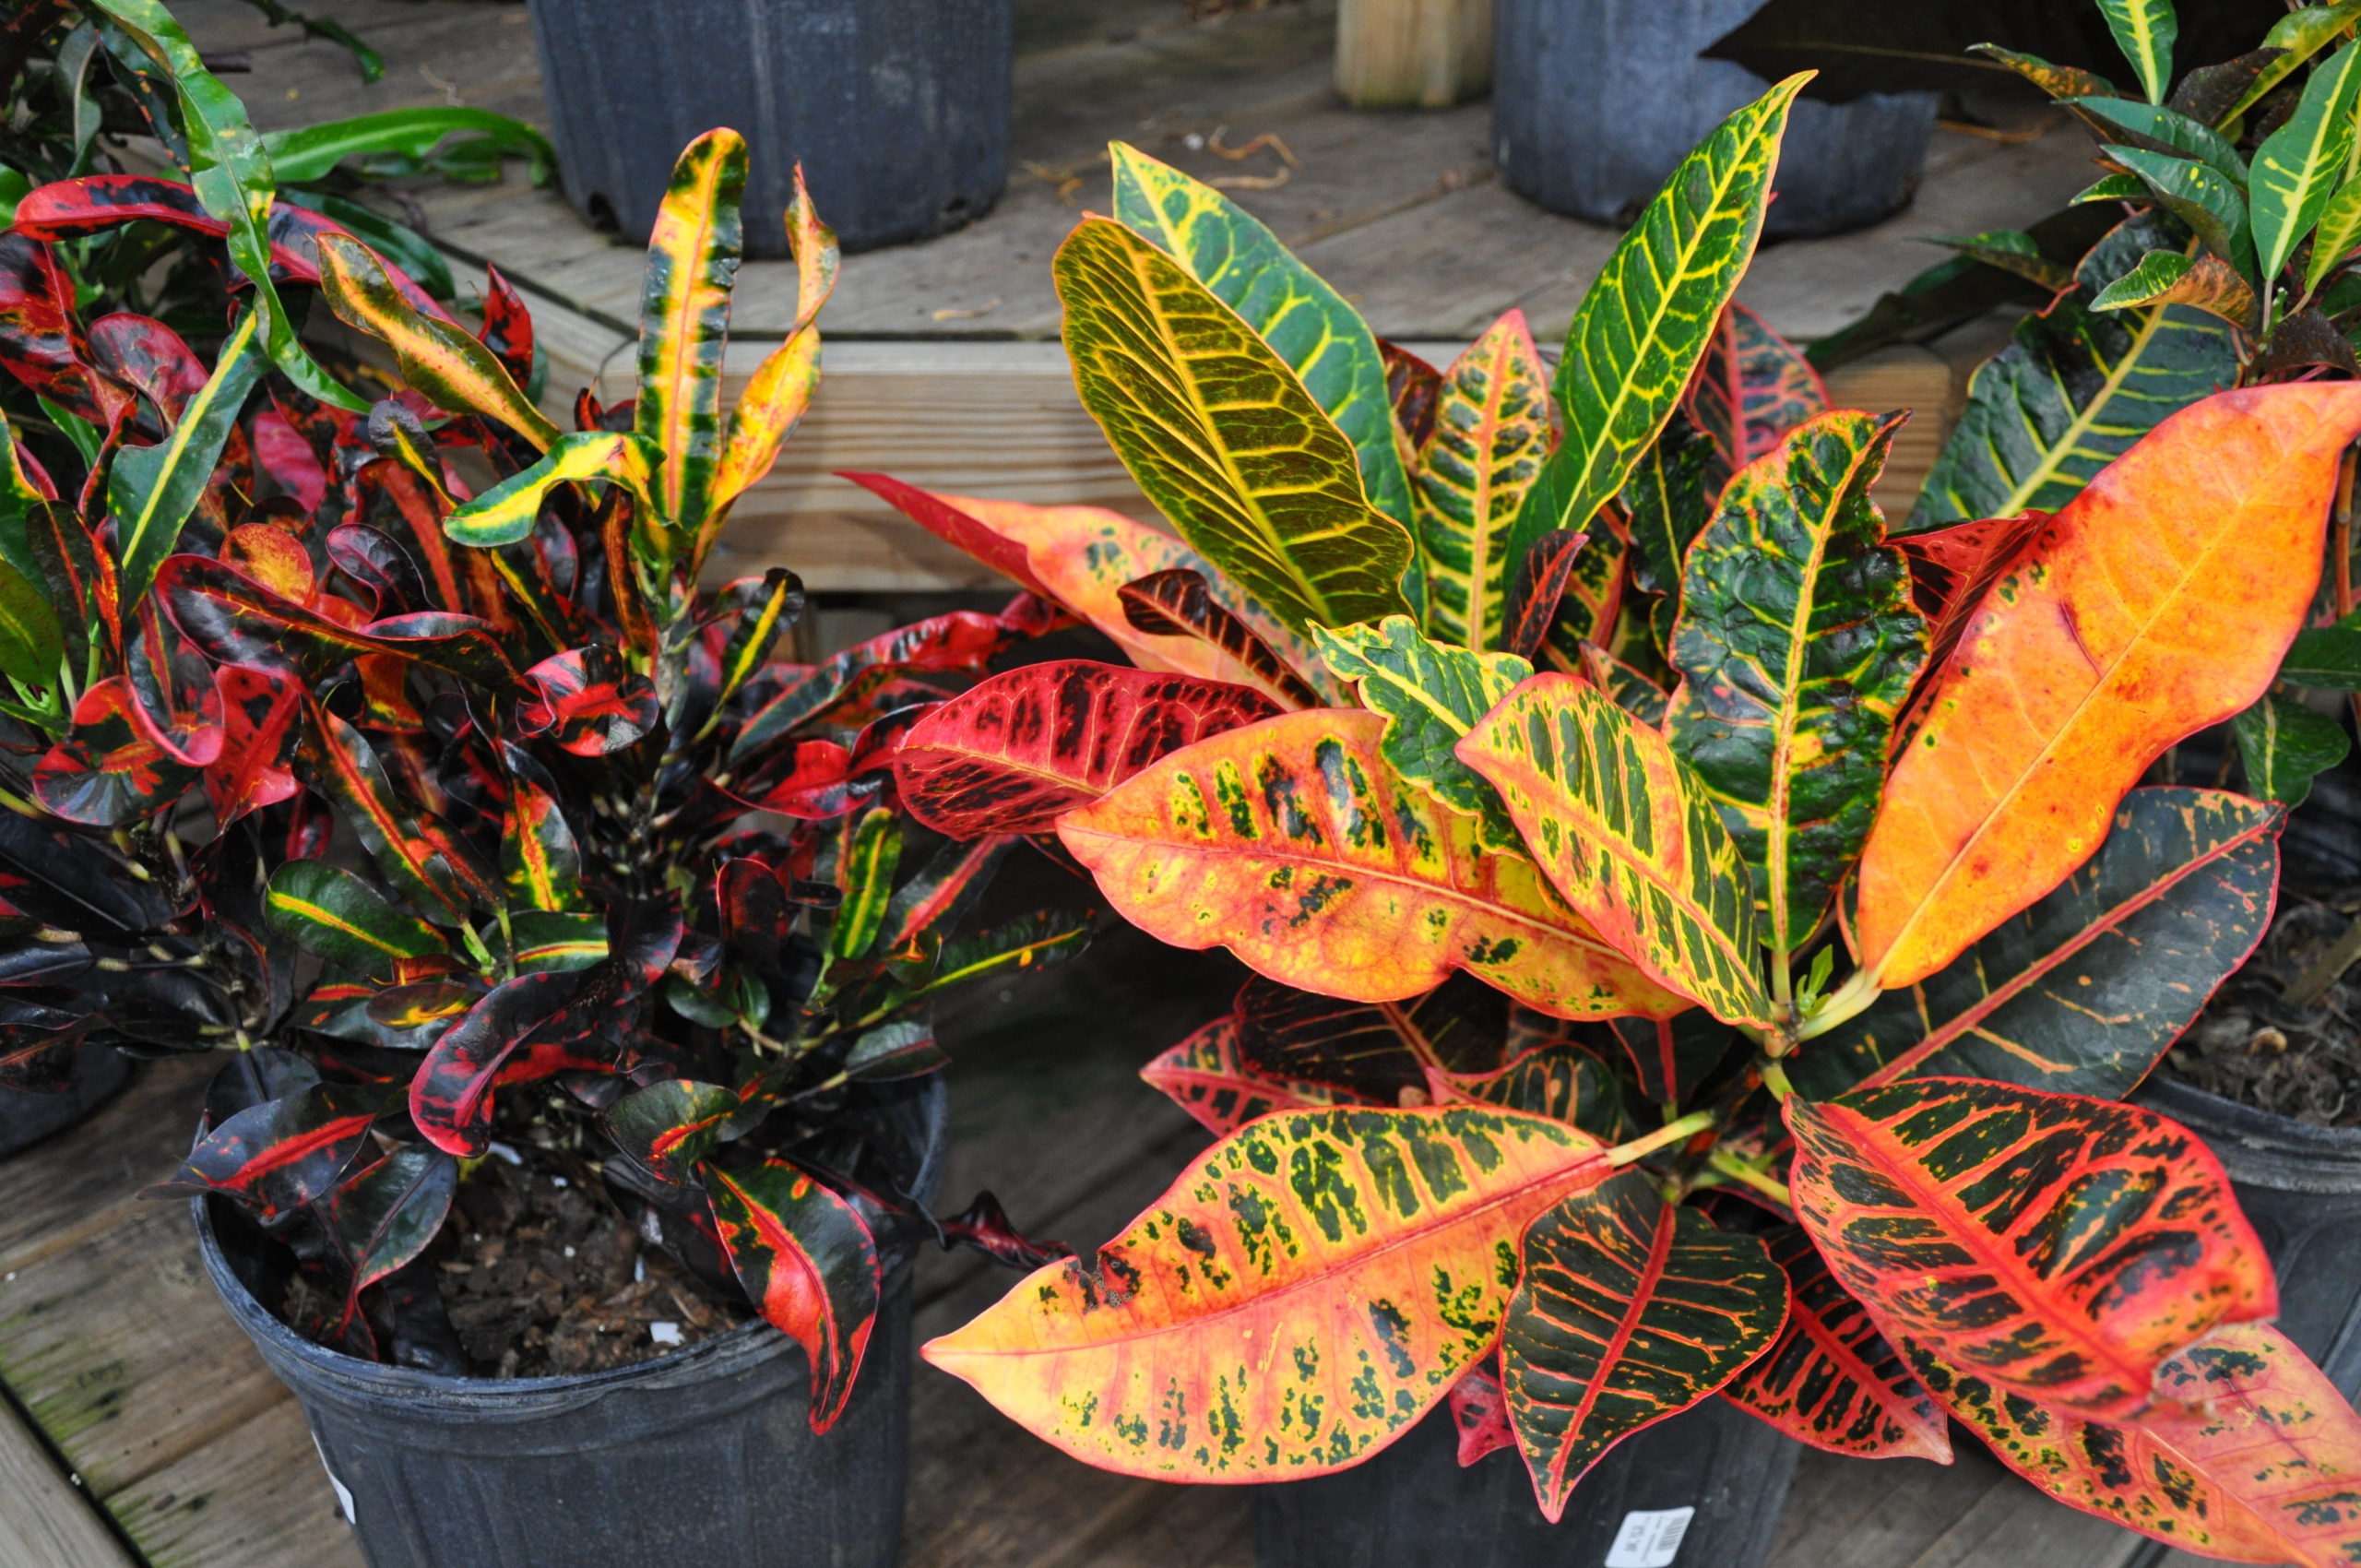 Crotons are valued for their colorful foliage and are available in pot sizes from 4 inches up. These are not long-lived plants and cold temperatures will result in sudden leaf drop.